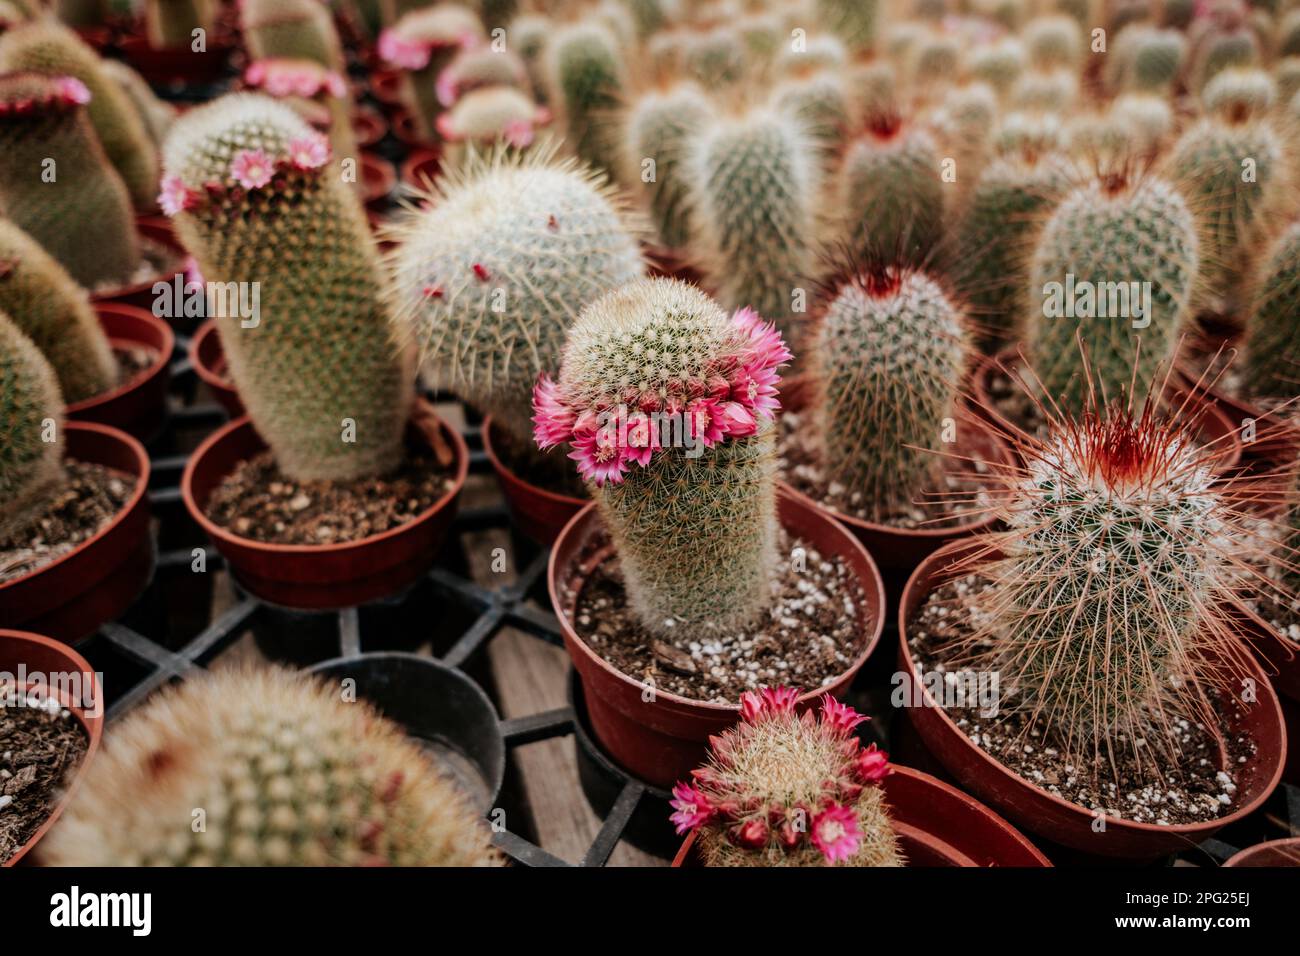 Assorted cactus blooming on shelf Stock Photo